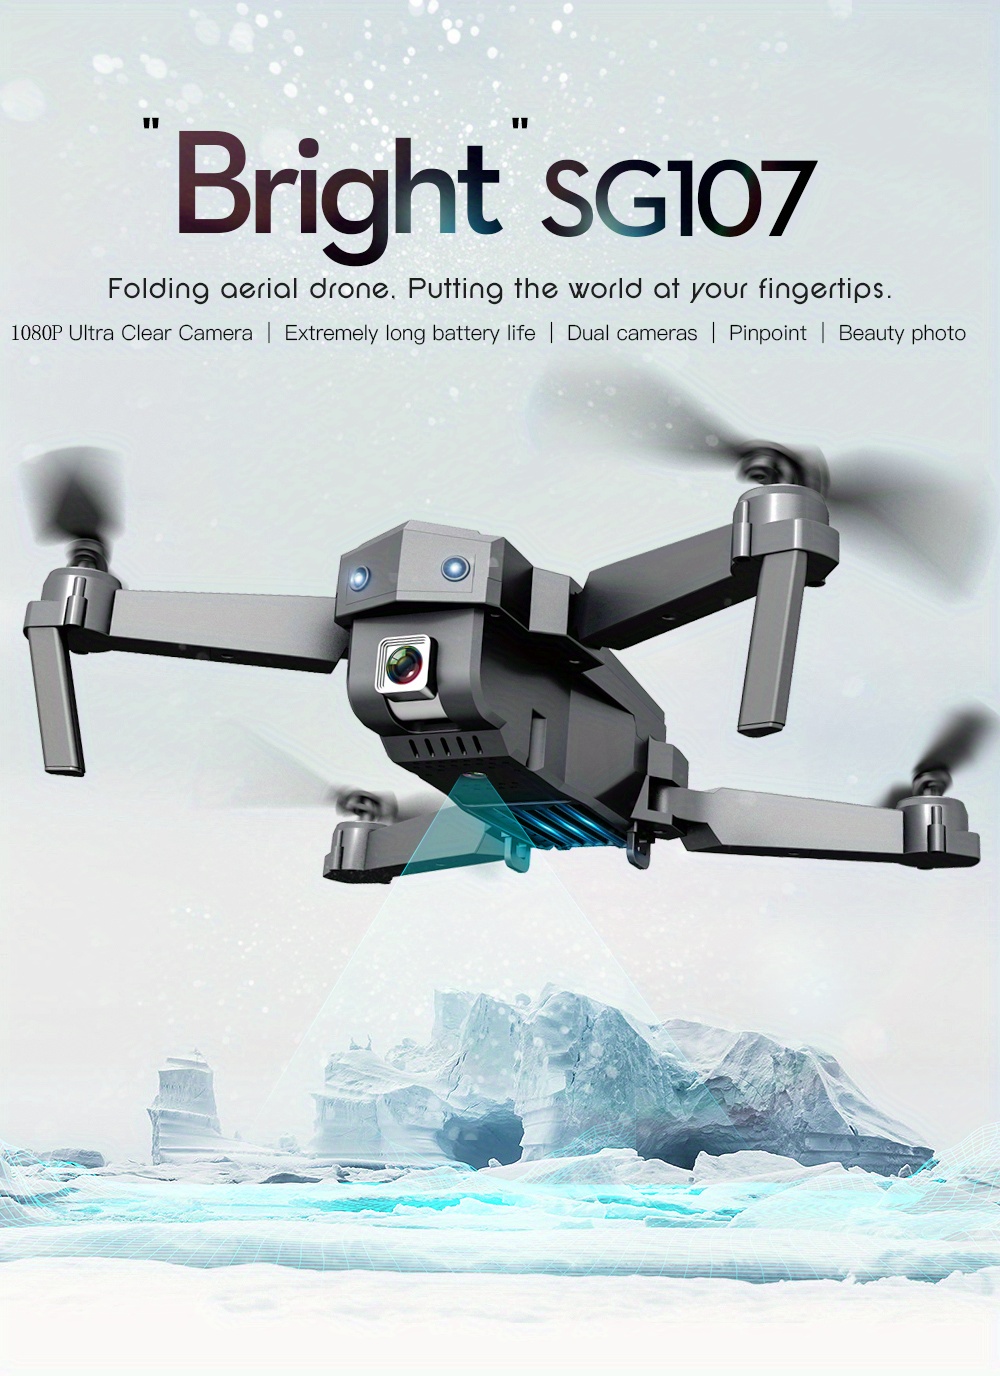 high definition camera drone with stable altitude hold gesture taking photos and videos easy control smart follow smooth surrounding flight long battery life details 0